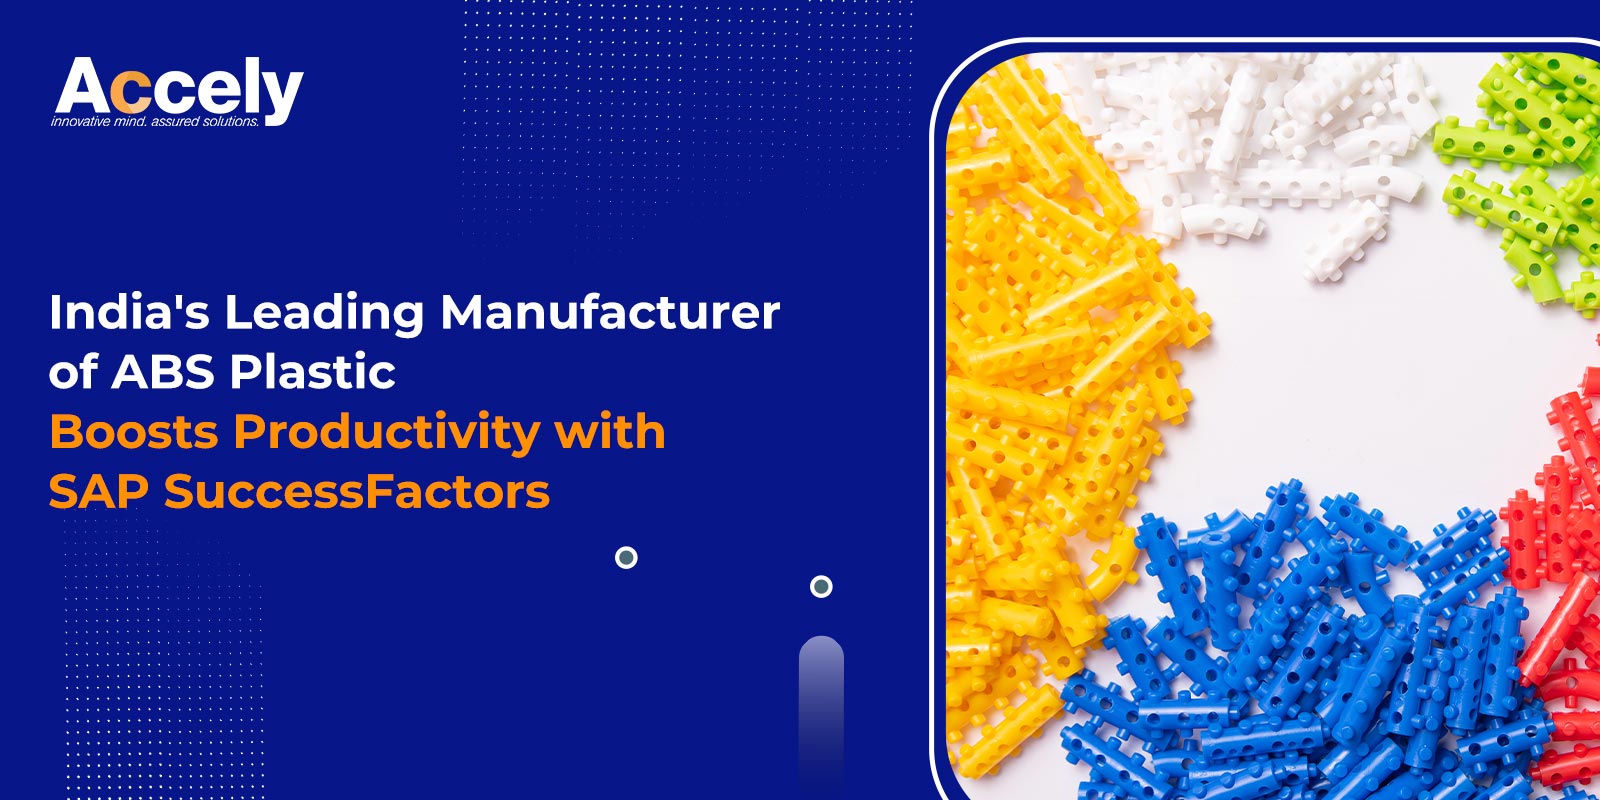 India's Leading Manufacturer of ABS Plastic Boosts Productivity with SAP SuccessFactors